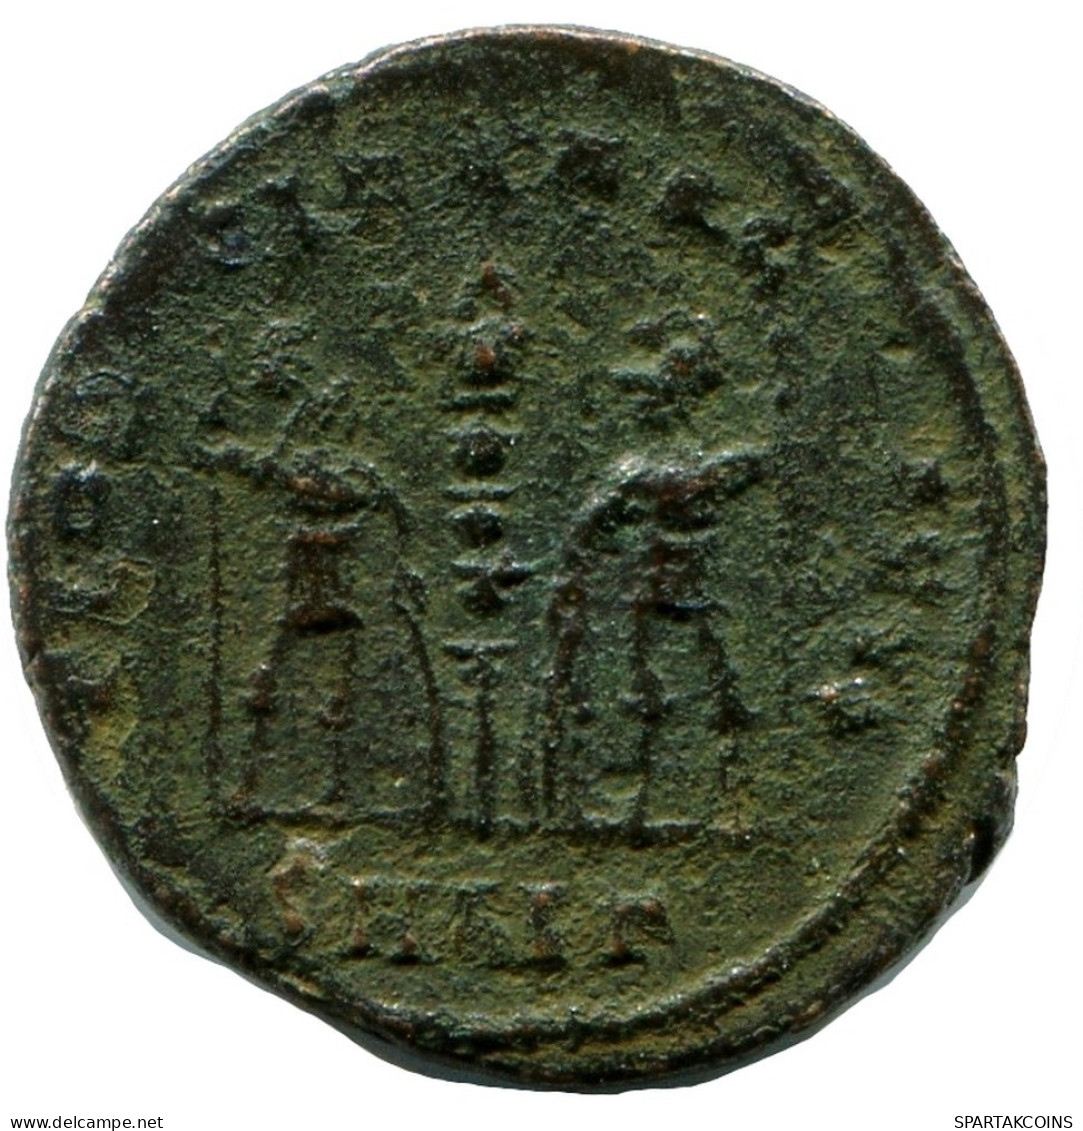 CONSTANS MINTED IN ALEKSANDRIA FROM THE ROYAL ONTARIO MUSEUM #ANC11363.14.U.A - El Impero Christiano (307 / 363)